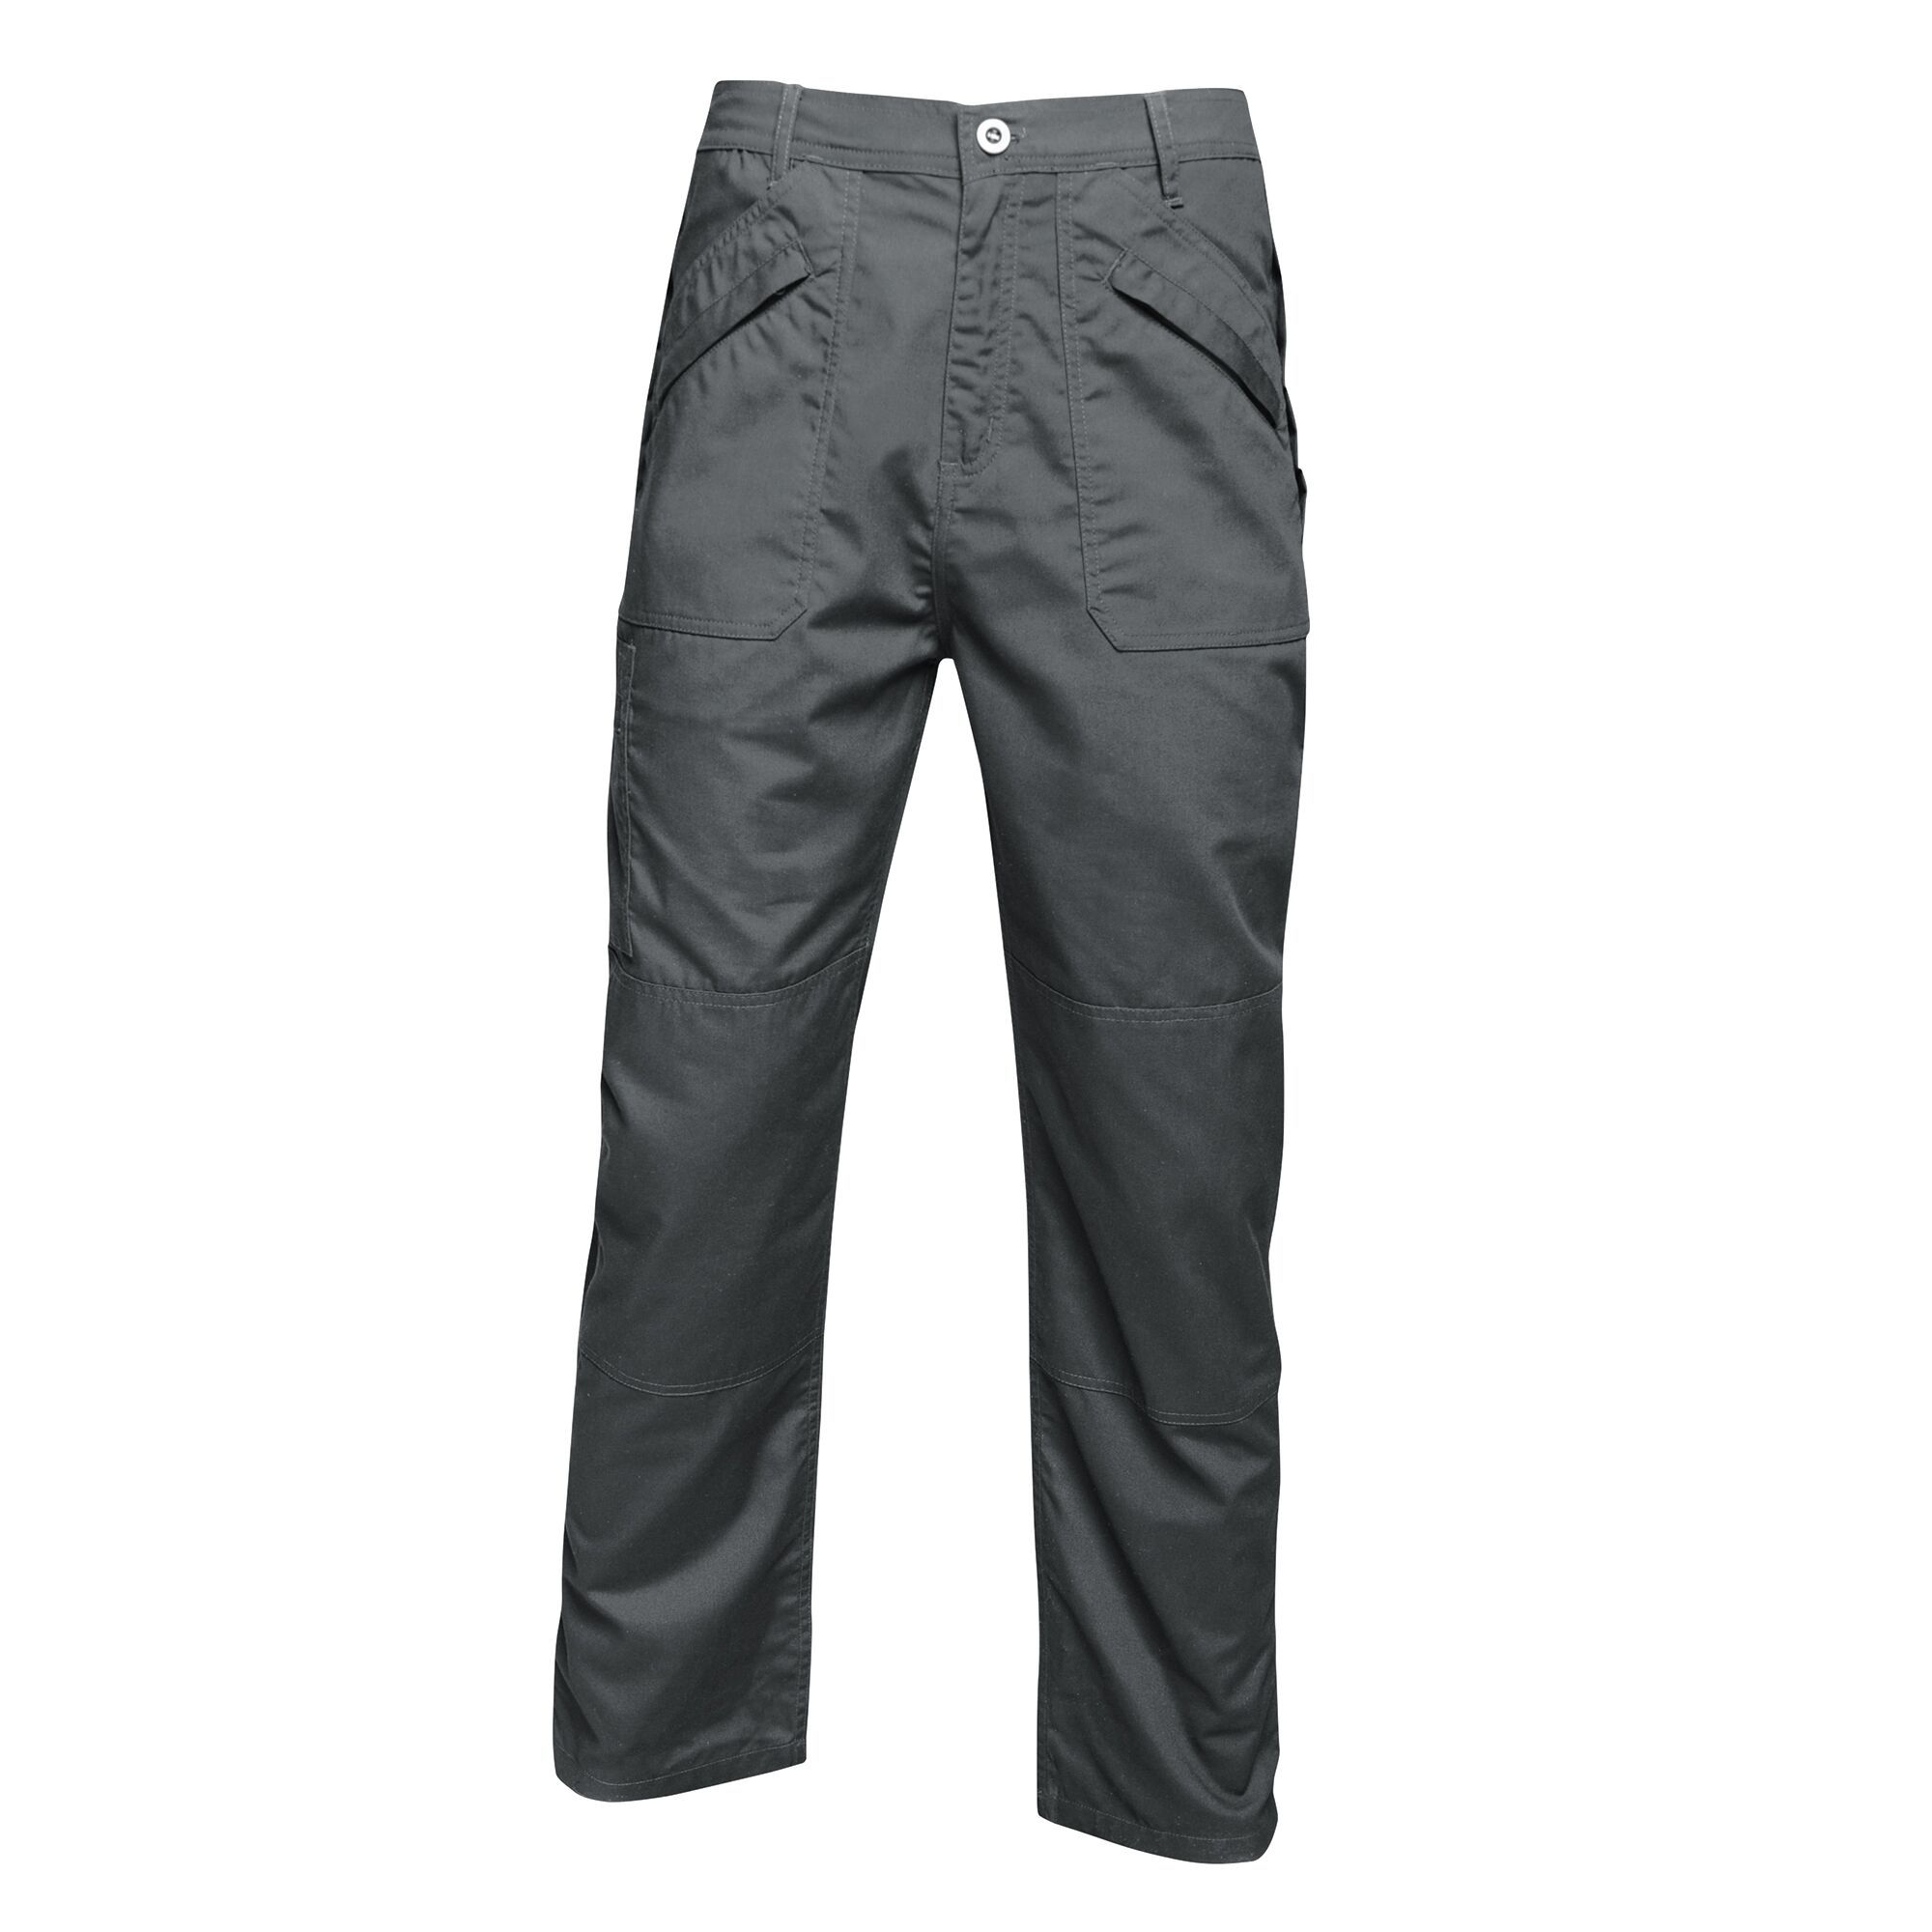 Mens waterproof trousers made of Polycotton fabric. Durable water repellent finish. Fabric weight 180g/m2. Water repellent coating. Part-elasticated waist. Double seat for extra strength. Knee patches. Belt loops. 2 front pockets. 4 welt covered front zip pockets. 1 cargo leg pocket. 2 back zipped pockets with welt covering. Ideal for wearing outdoors in the rain. 65% Polyester, 35% Cotton. Regular: 32in.